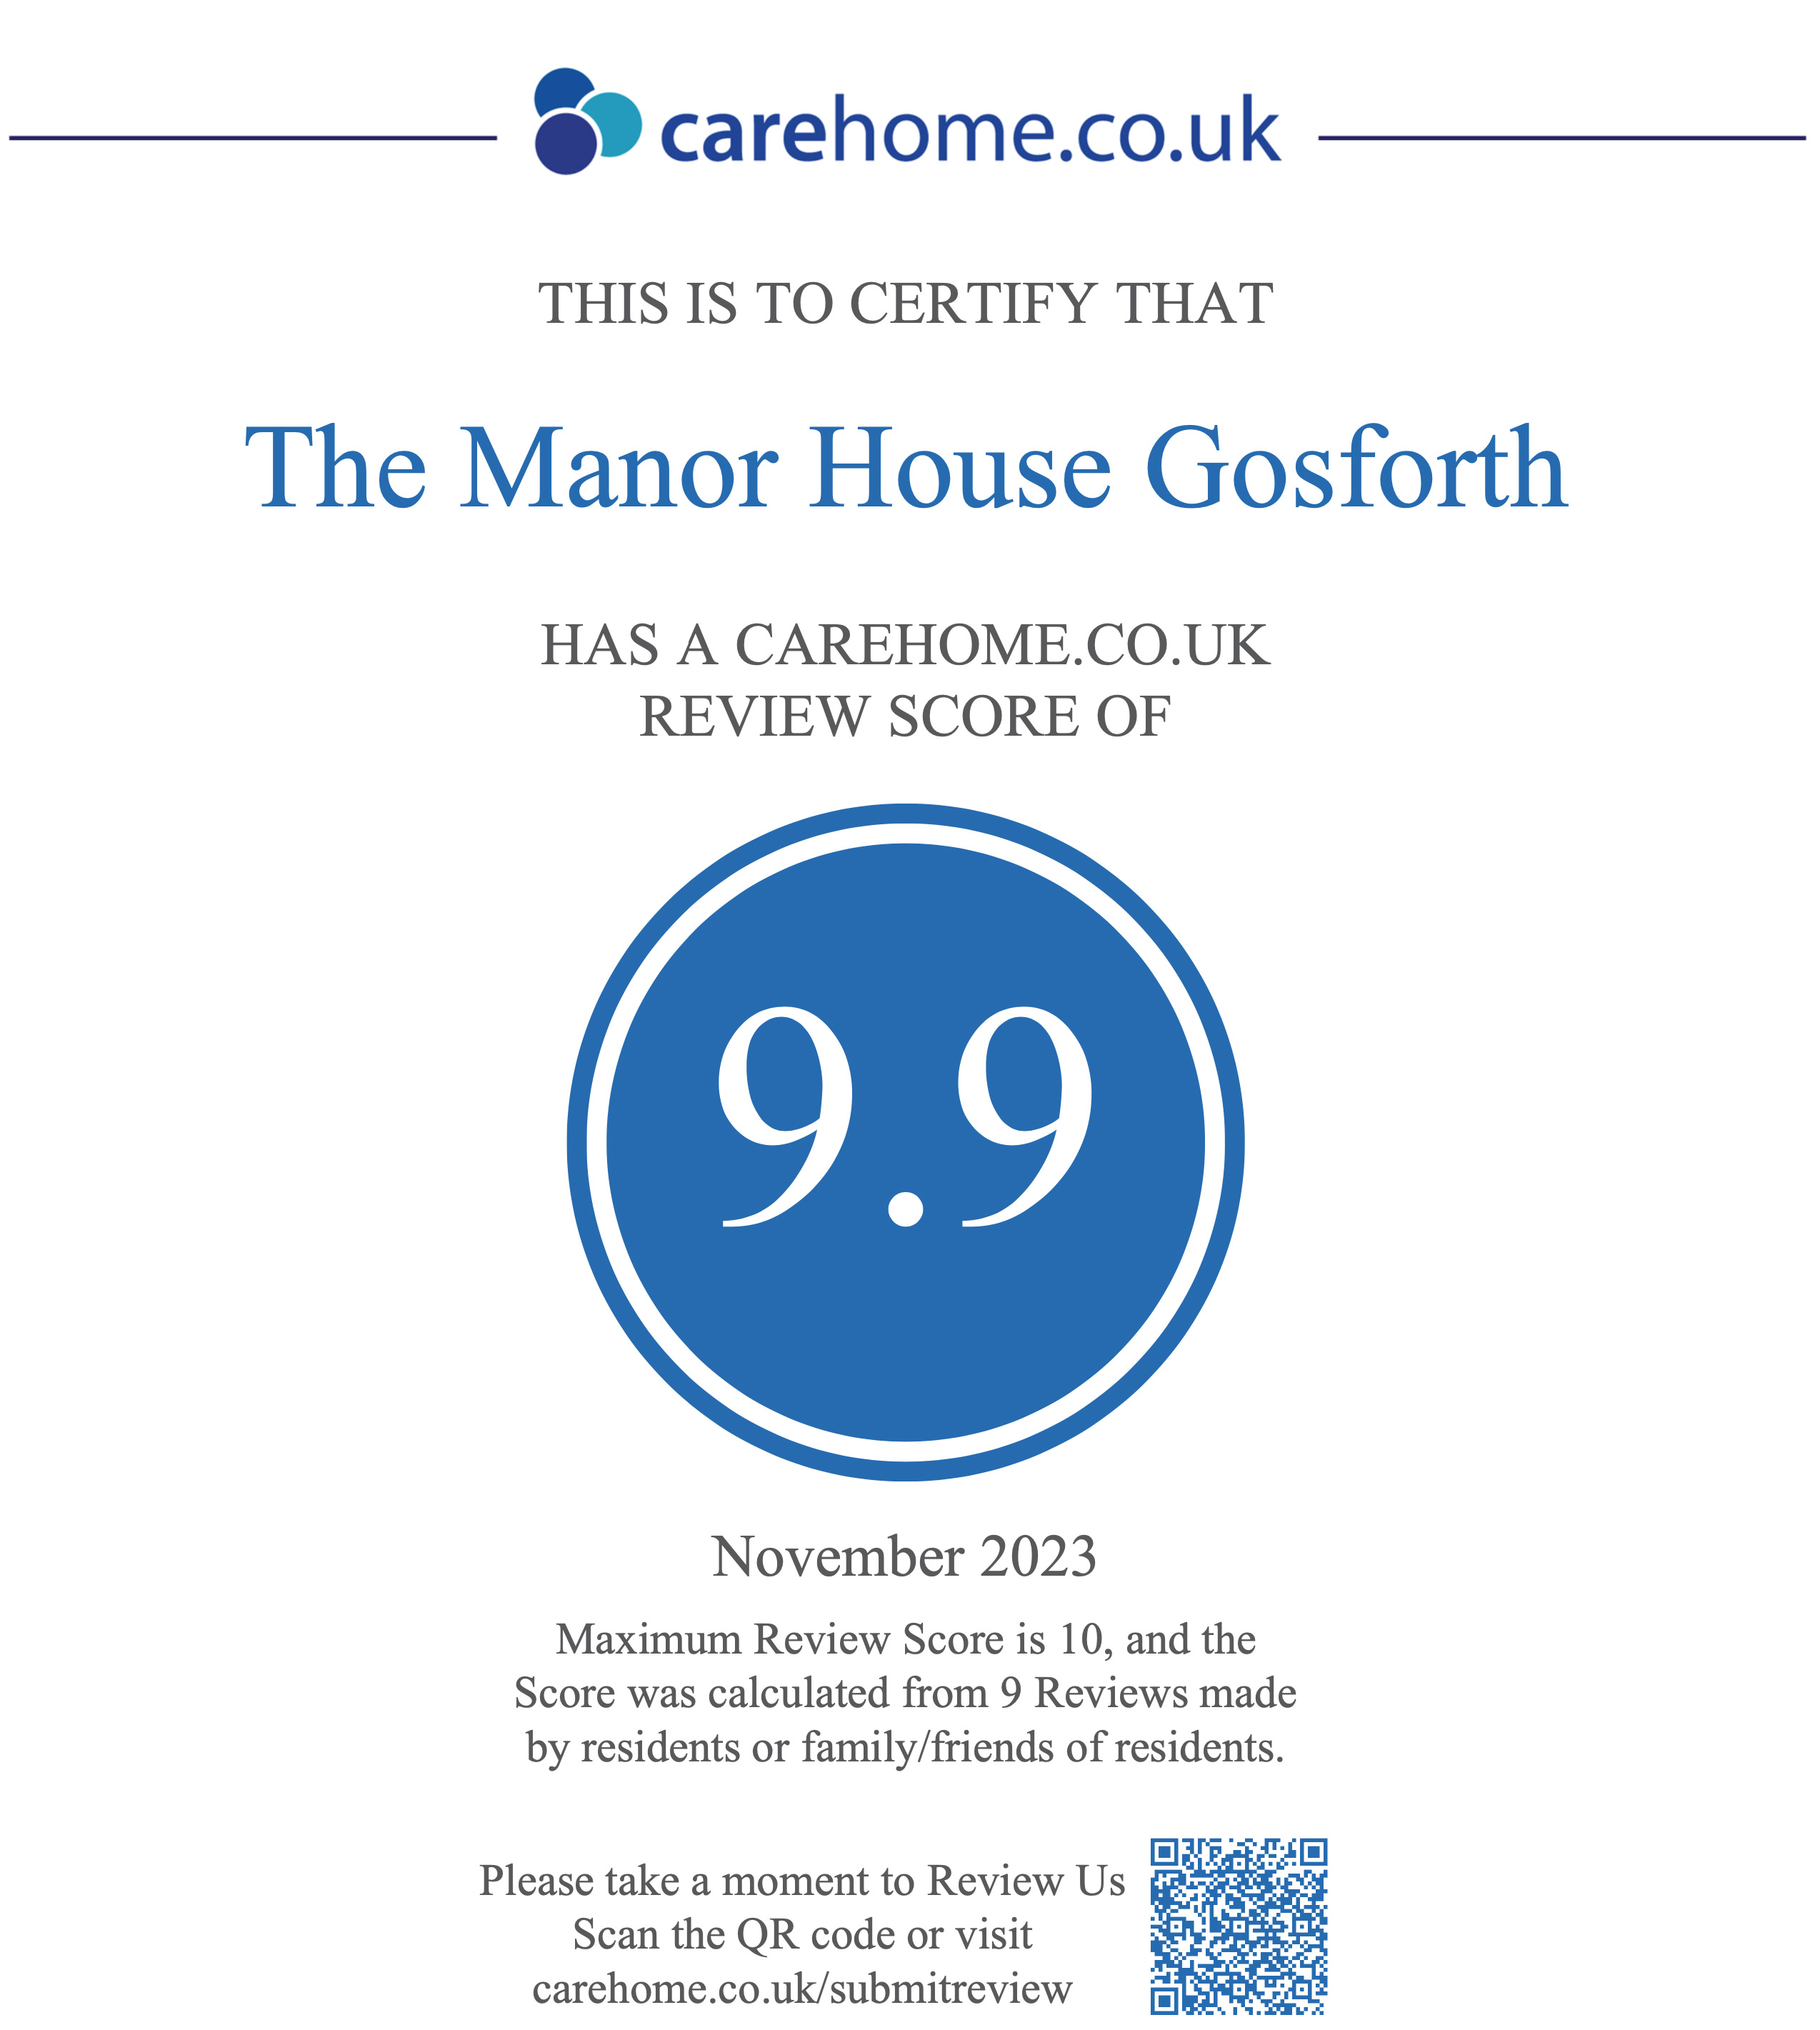 9.9 on carehome.co.uk